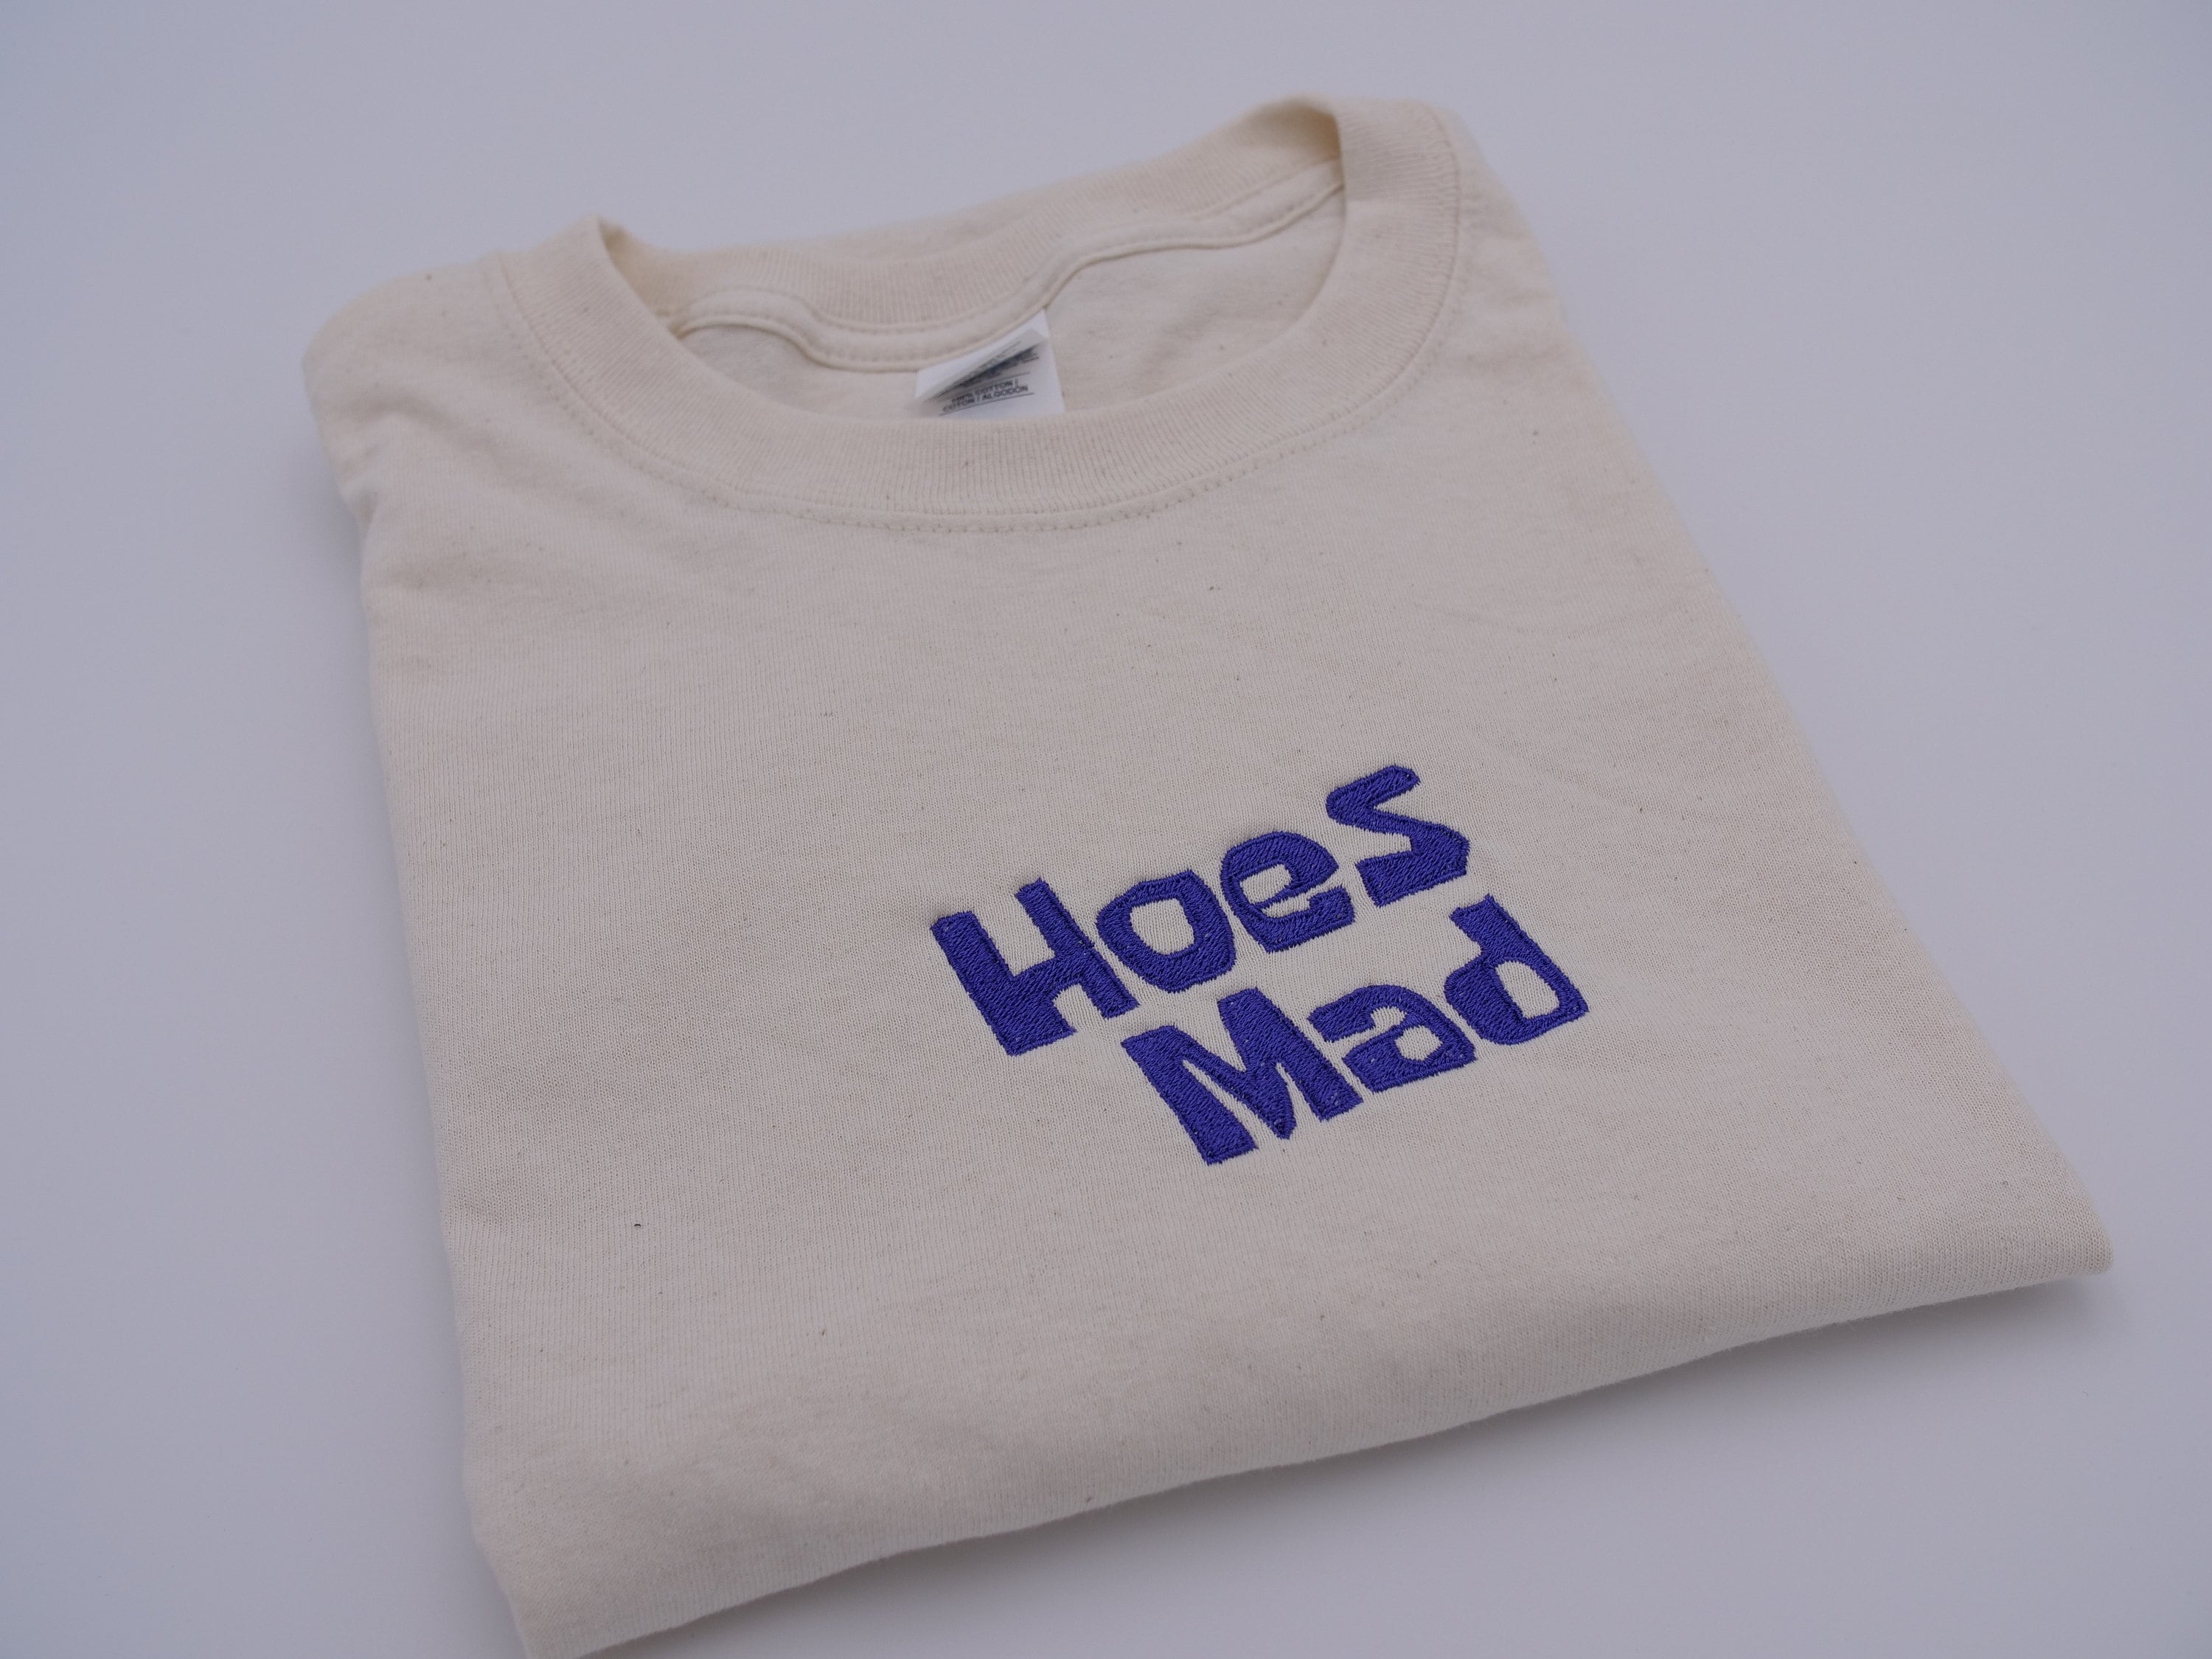 Hoes Mad T-shirt S-XL Free Domestic Shipping -  UK